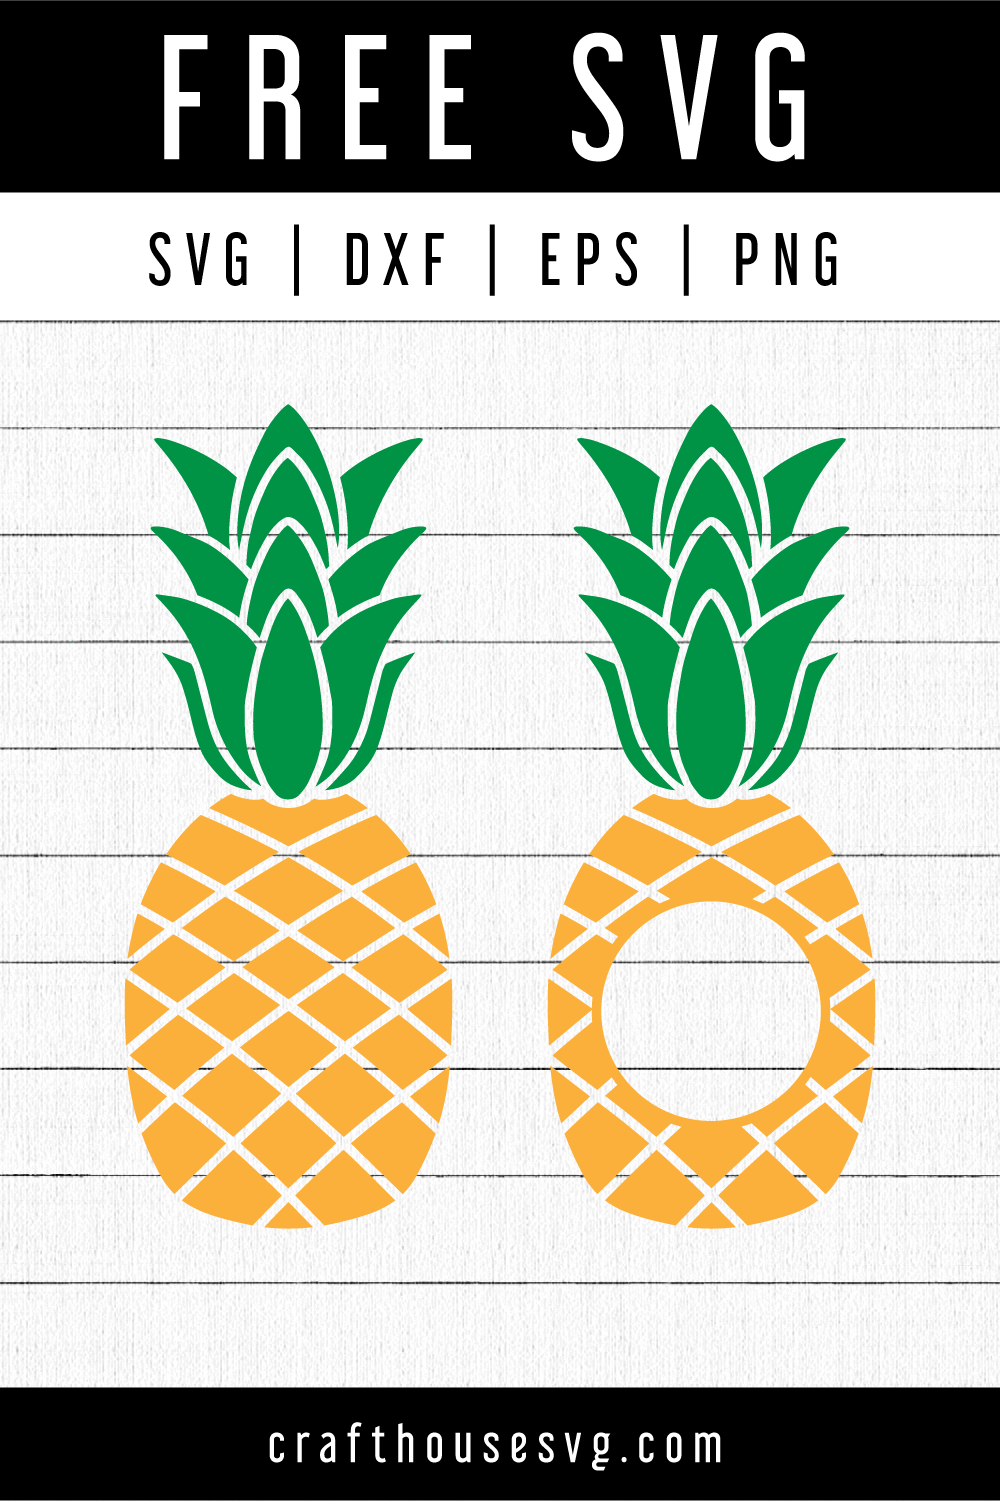 Download Free Pineapple Svg Craft House Svg